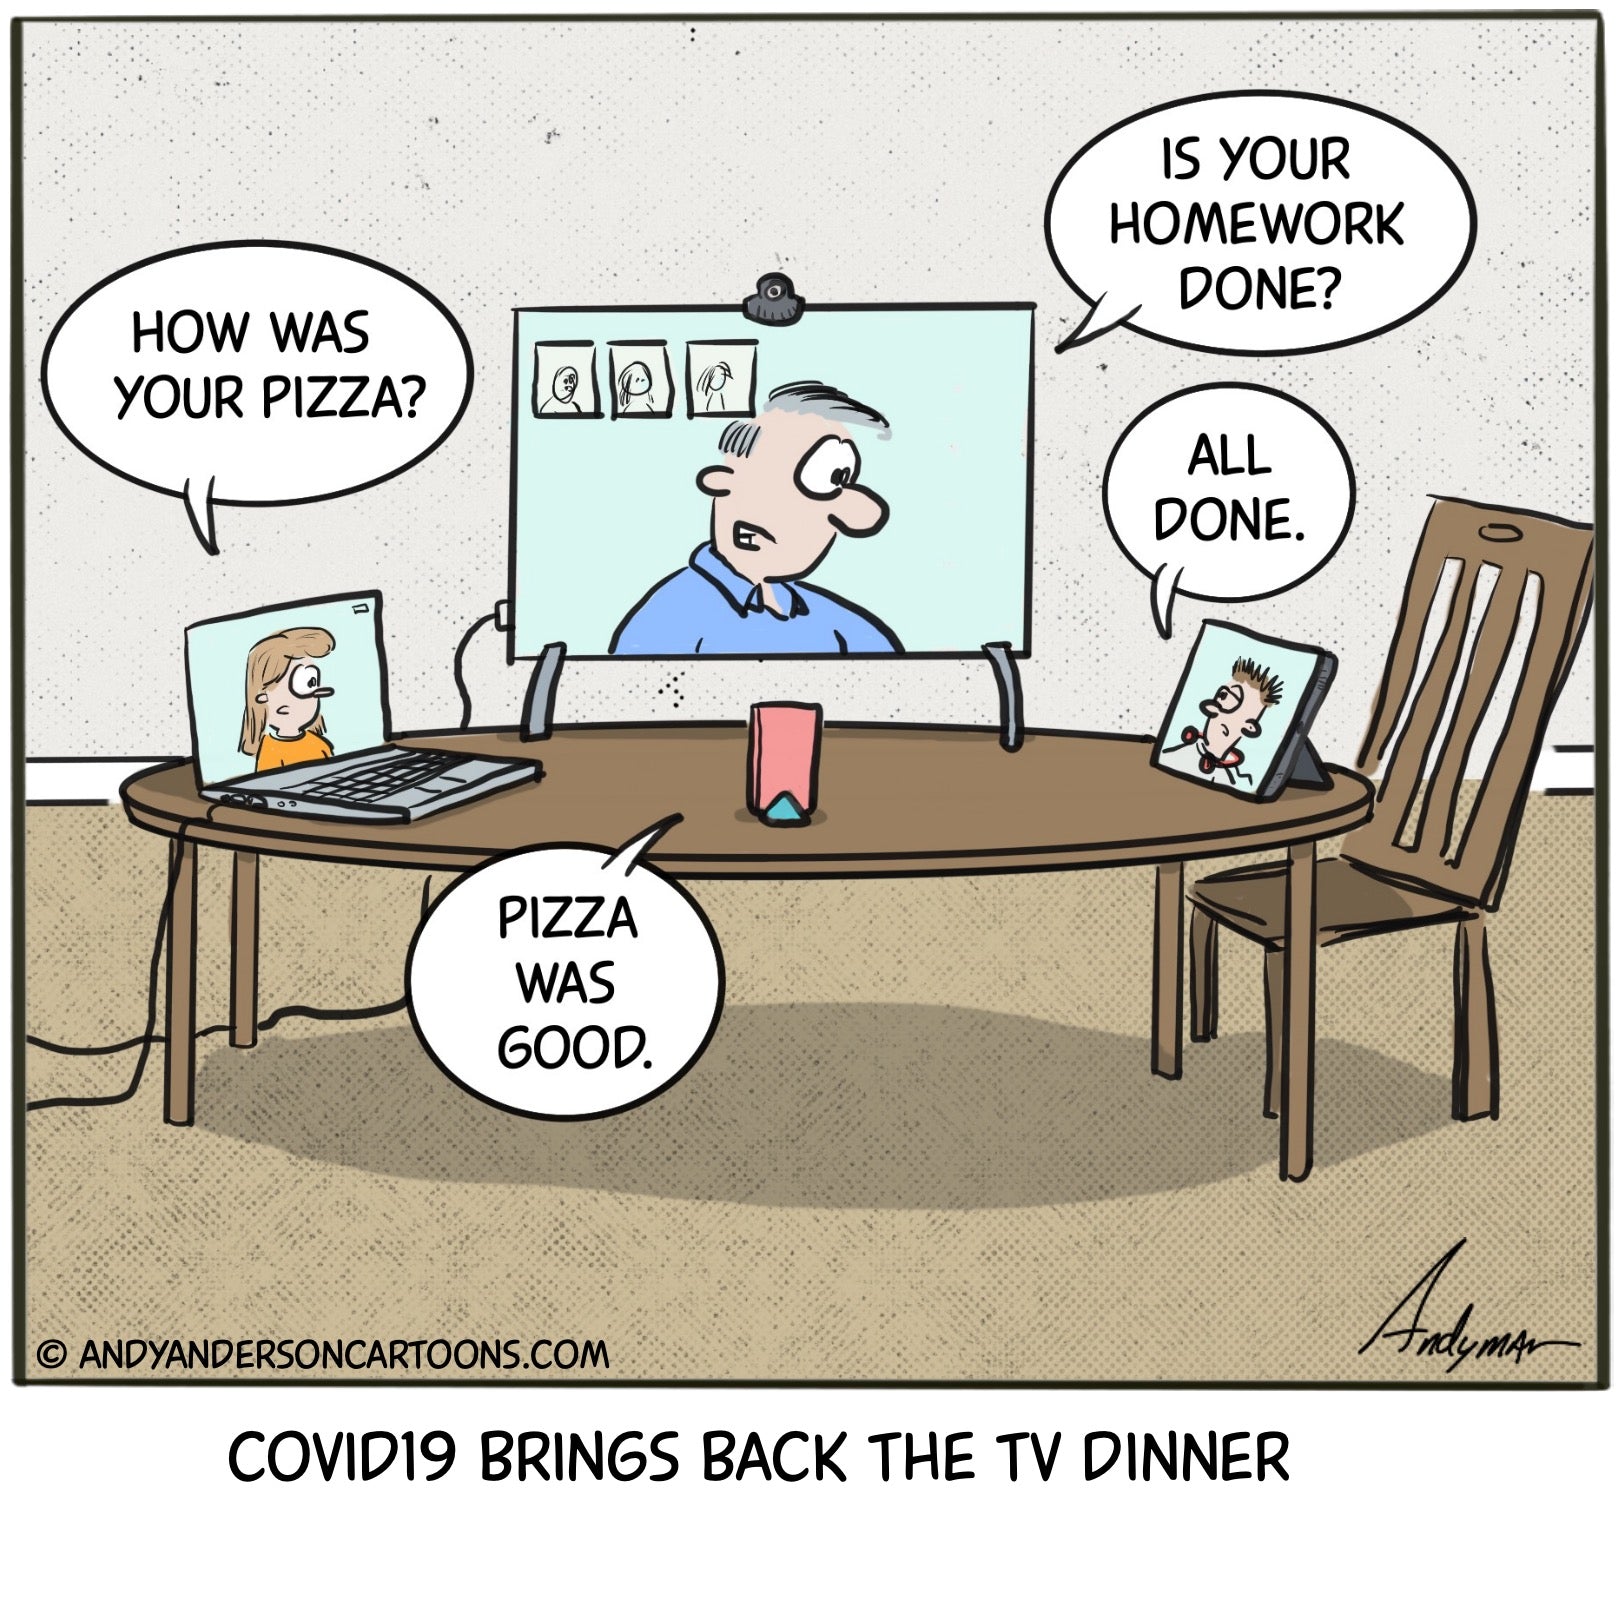 Cartoon about COVID19 brining back the TV dinner